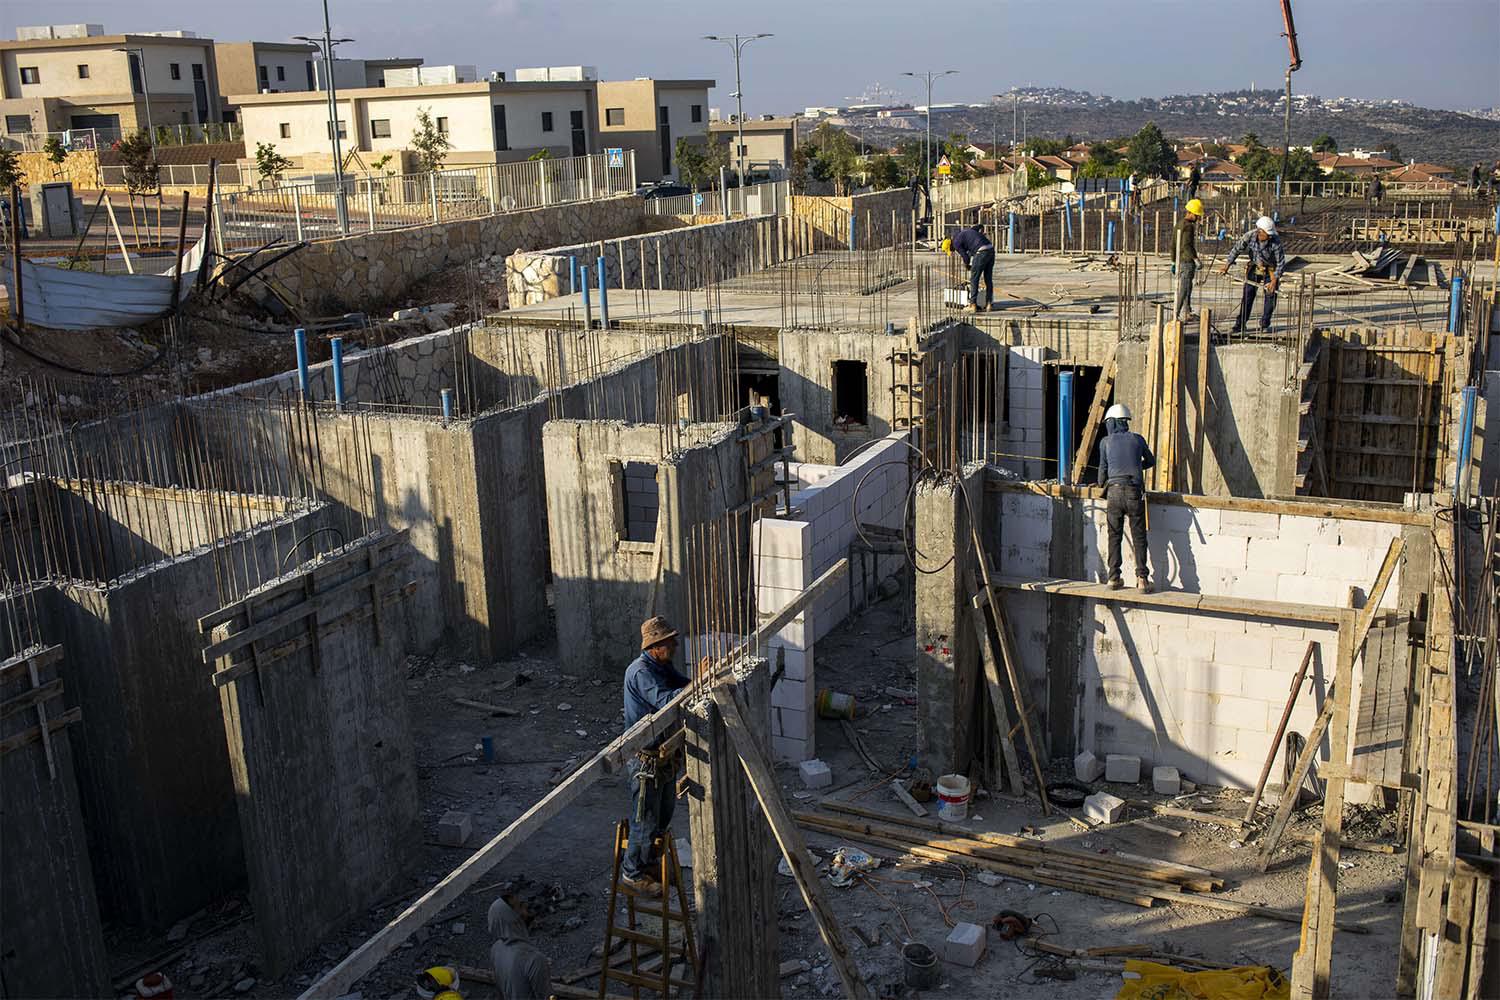 THe Palestinian Authority said the new settlement plans could have a catastrophic impact on chances to make peace on the basis of the two-state solution 